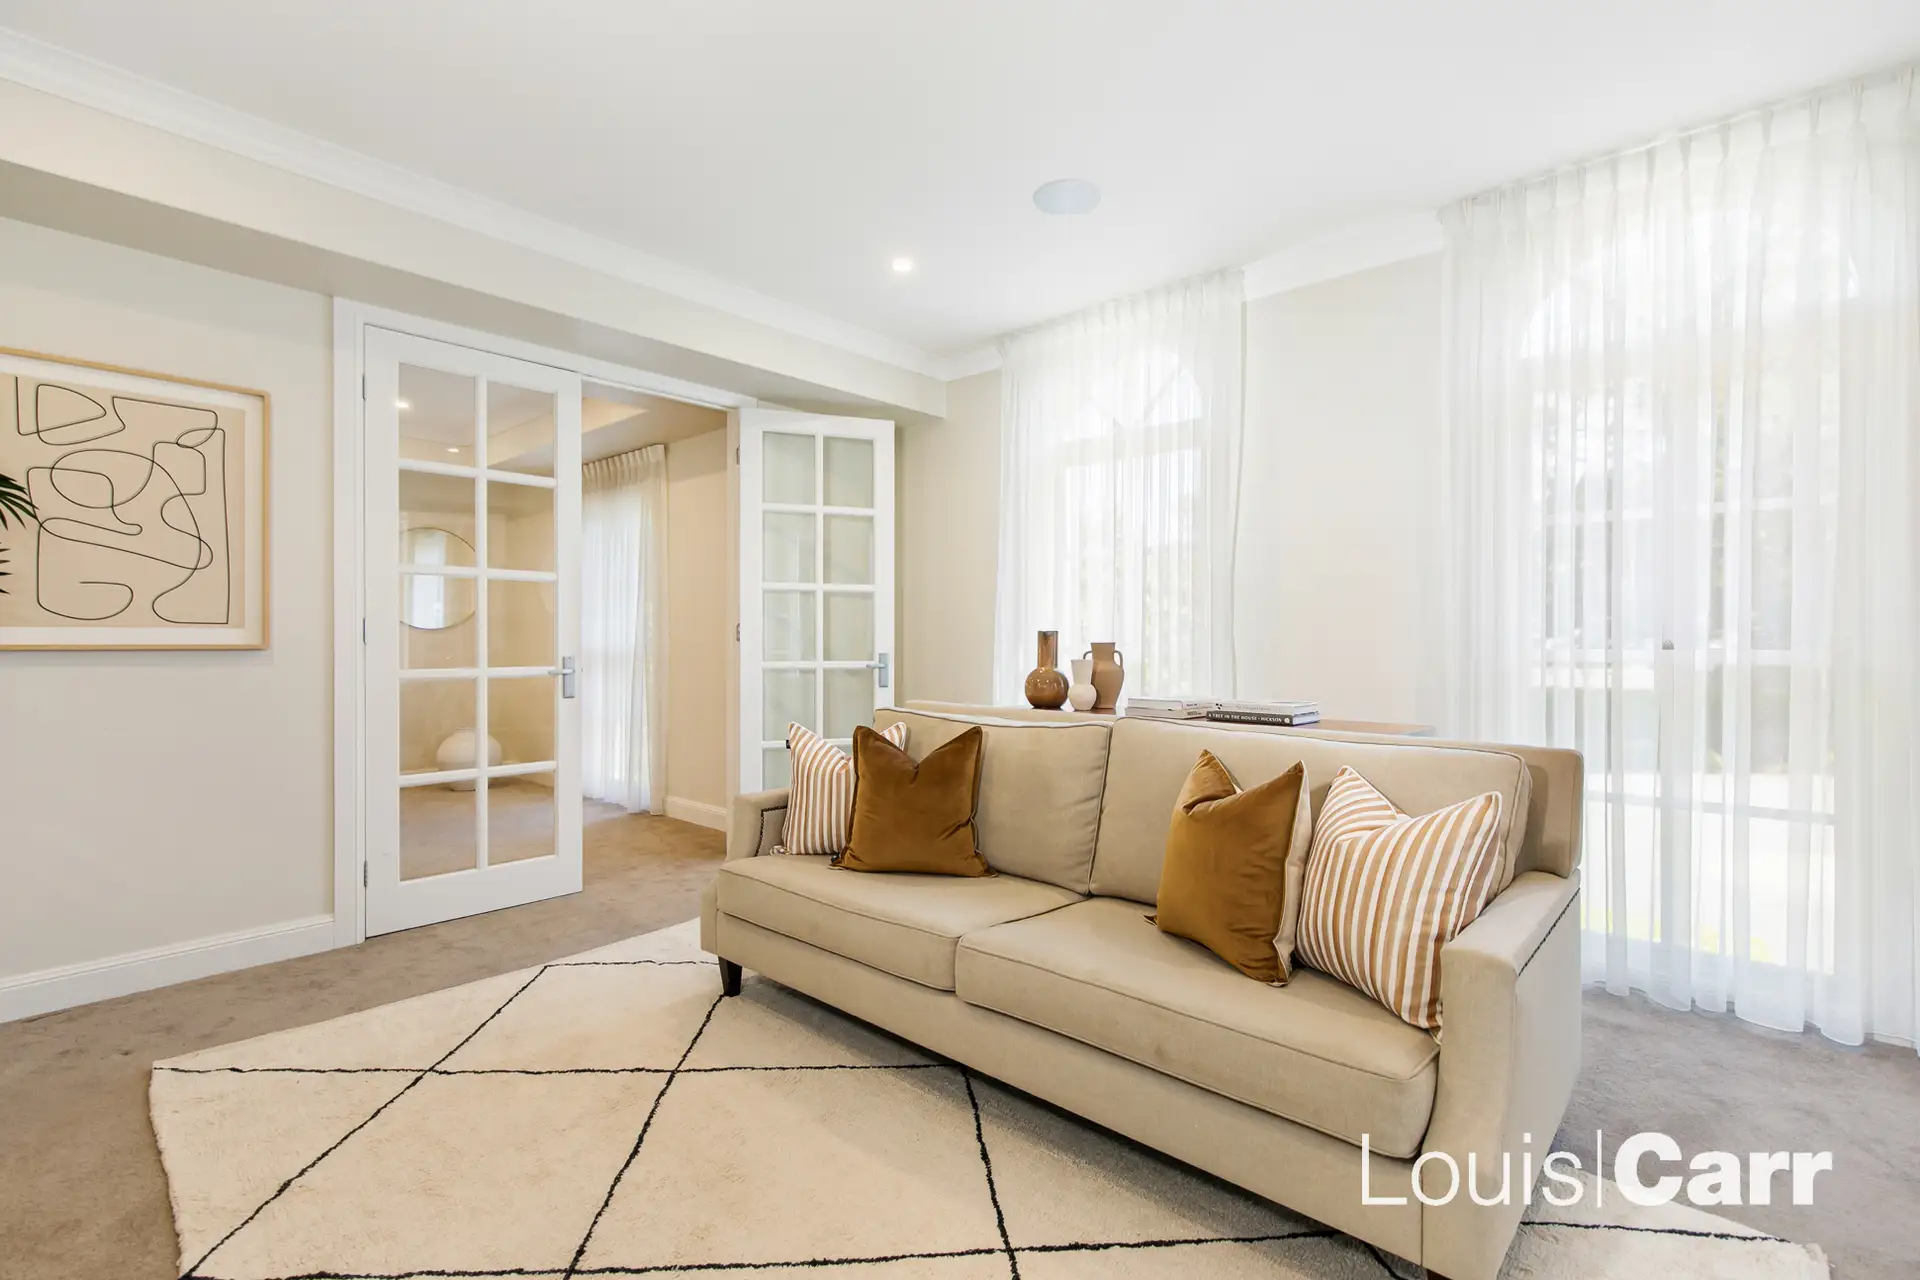 Photo #8: 23 Doris Hirst Place, West Pennant Hills - Sold by Louis Carr Real Estate